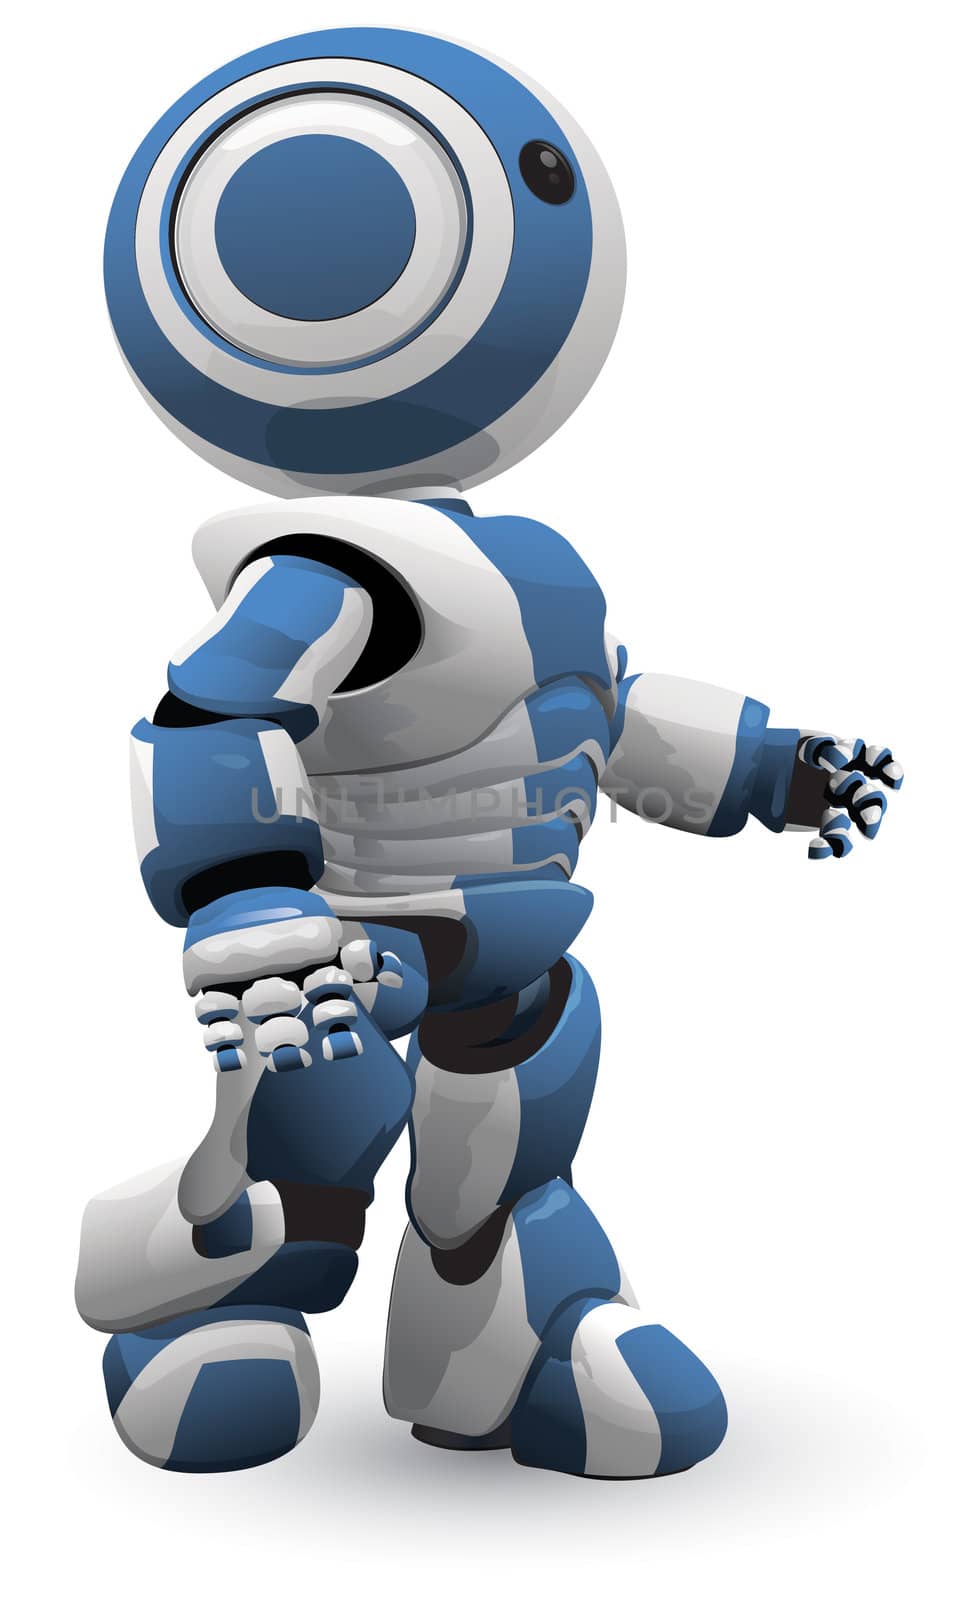 A blue and white robot vector derivative walking forward in determination. Or maybe he has just come off the assembly line and is looking at the new world before him!